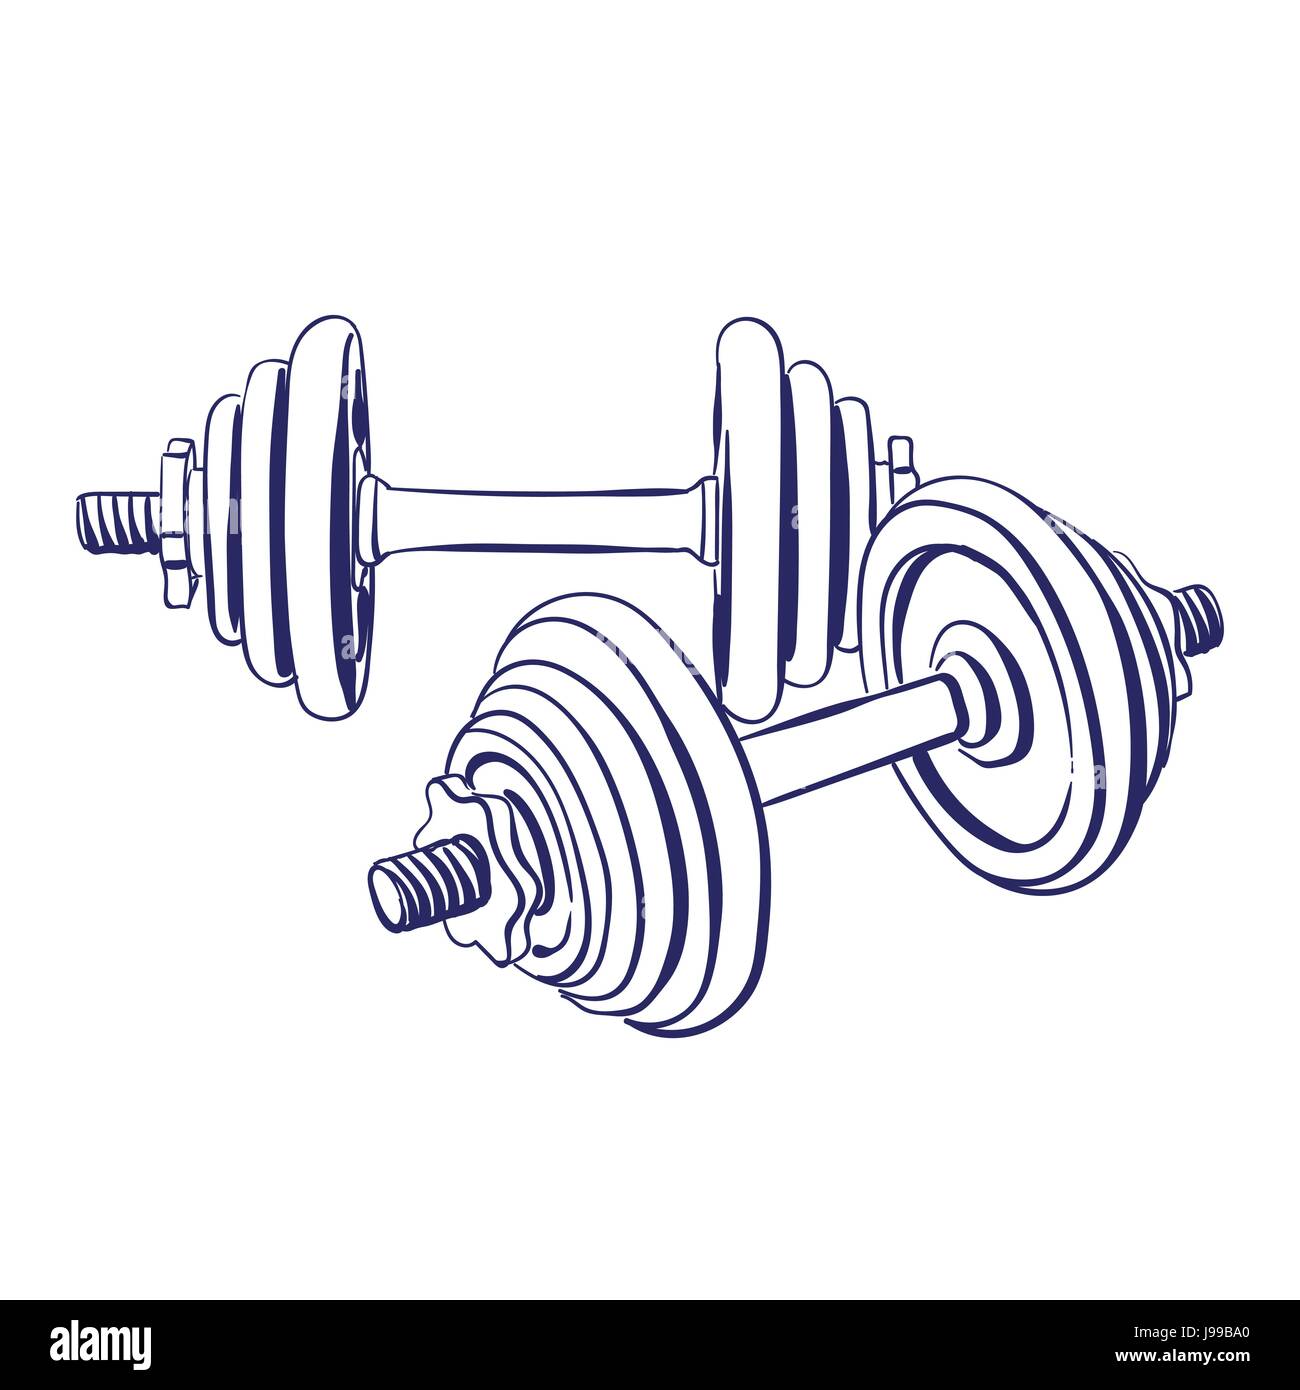 Drawing weight barbell equipment fitness Immagini Vettoriali Stock - Alamy